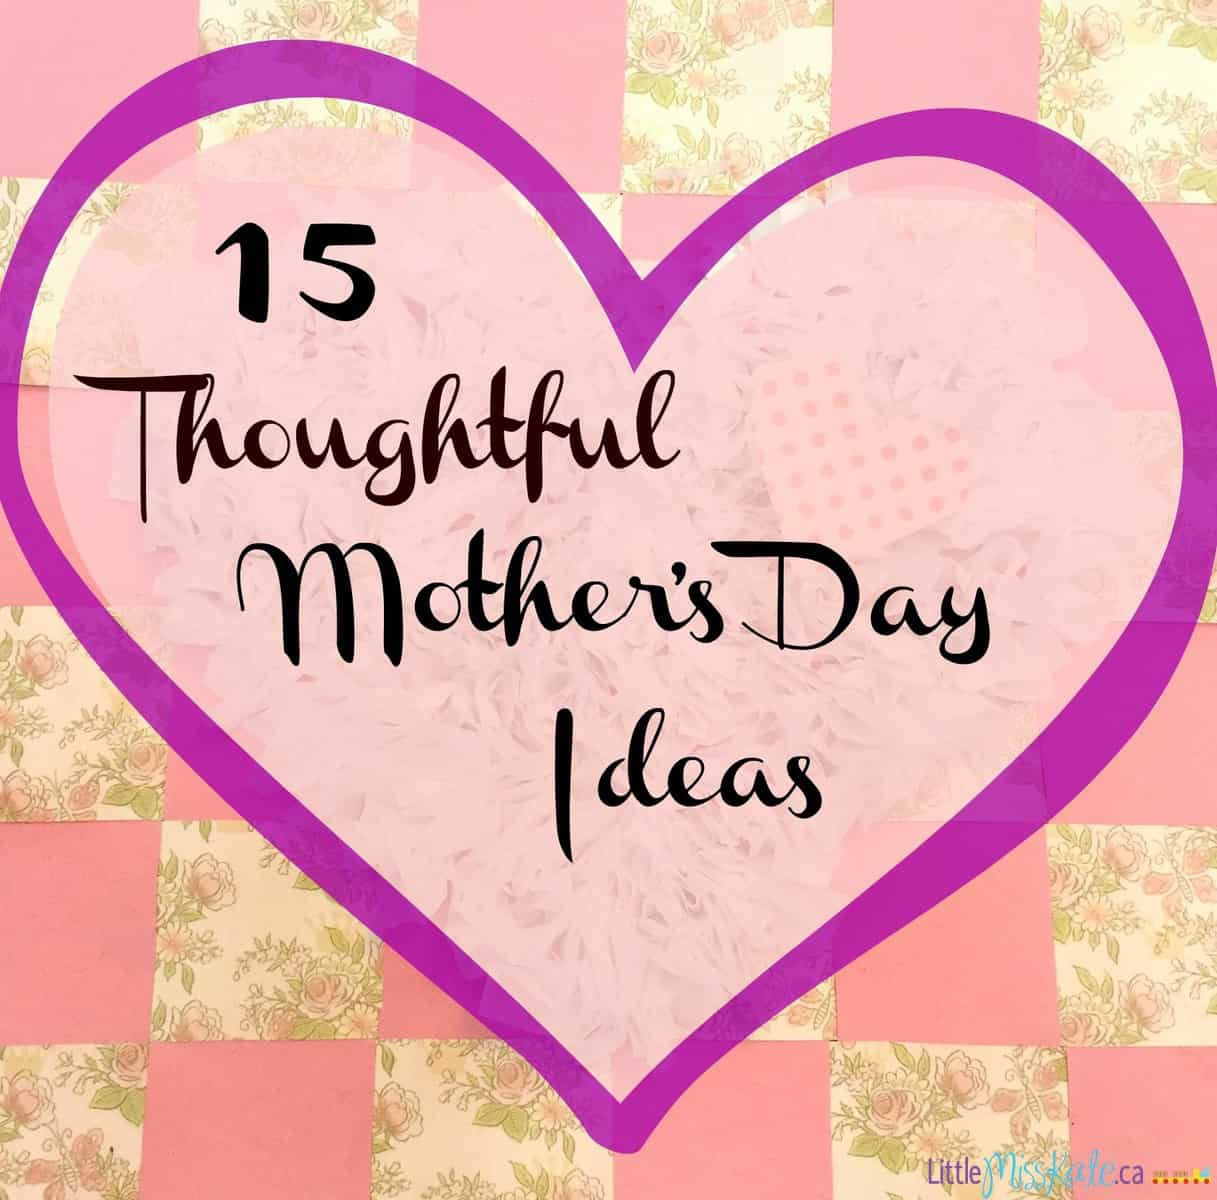 Mother's Day Letter Ideas
 15 Thoughtful Mother s Day Ideas Little Miss Kate